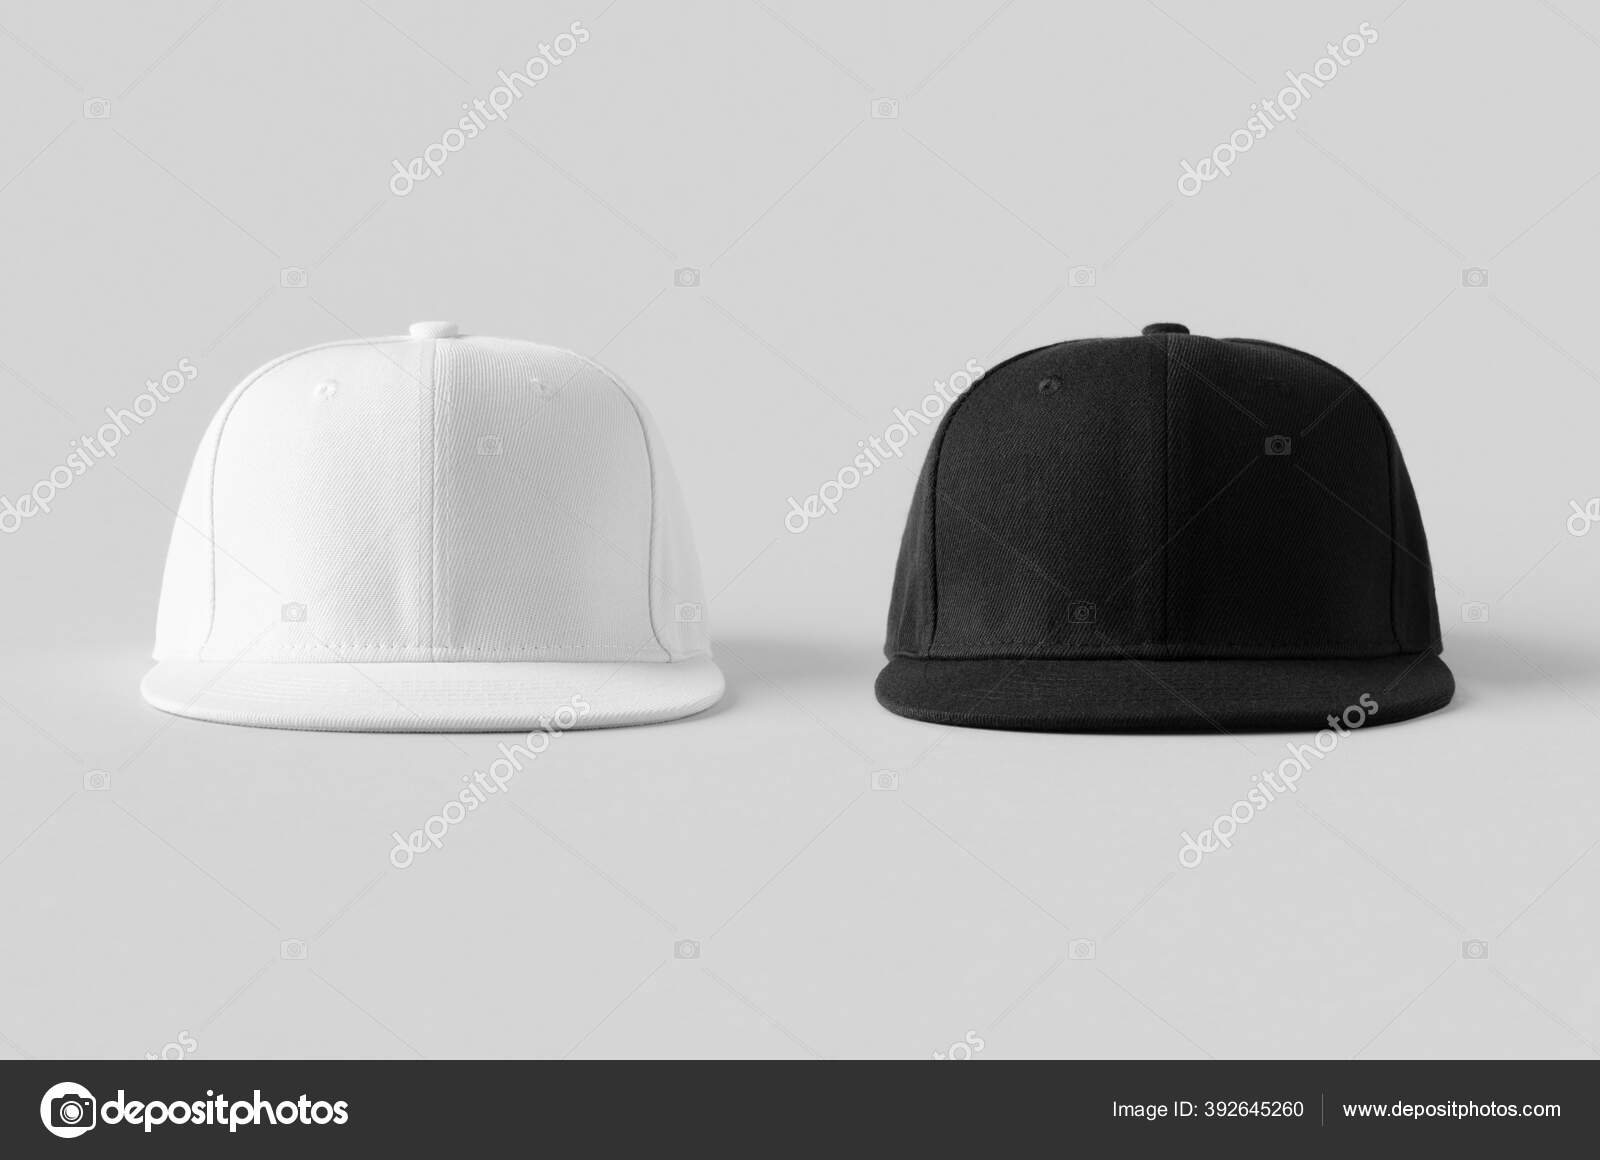 Download White Black Snapback Caps Mockup Grey Background Front View Royalty Free Photo Stock Image By C Shablonstudio 392645260